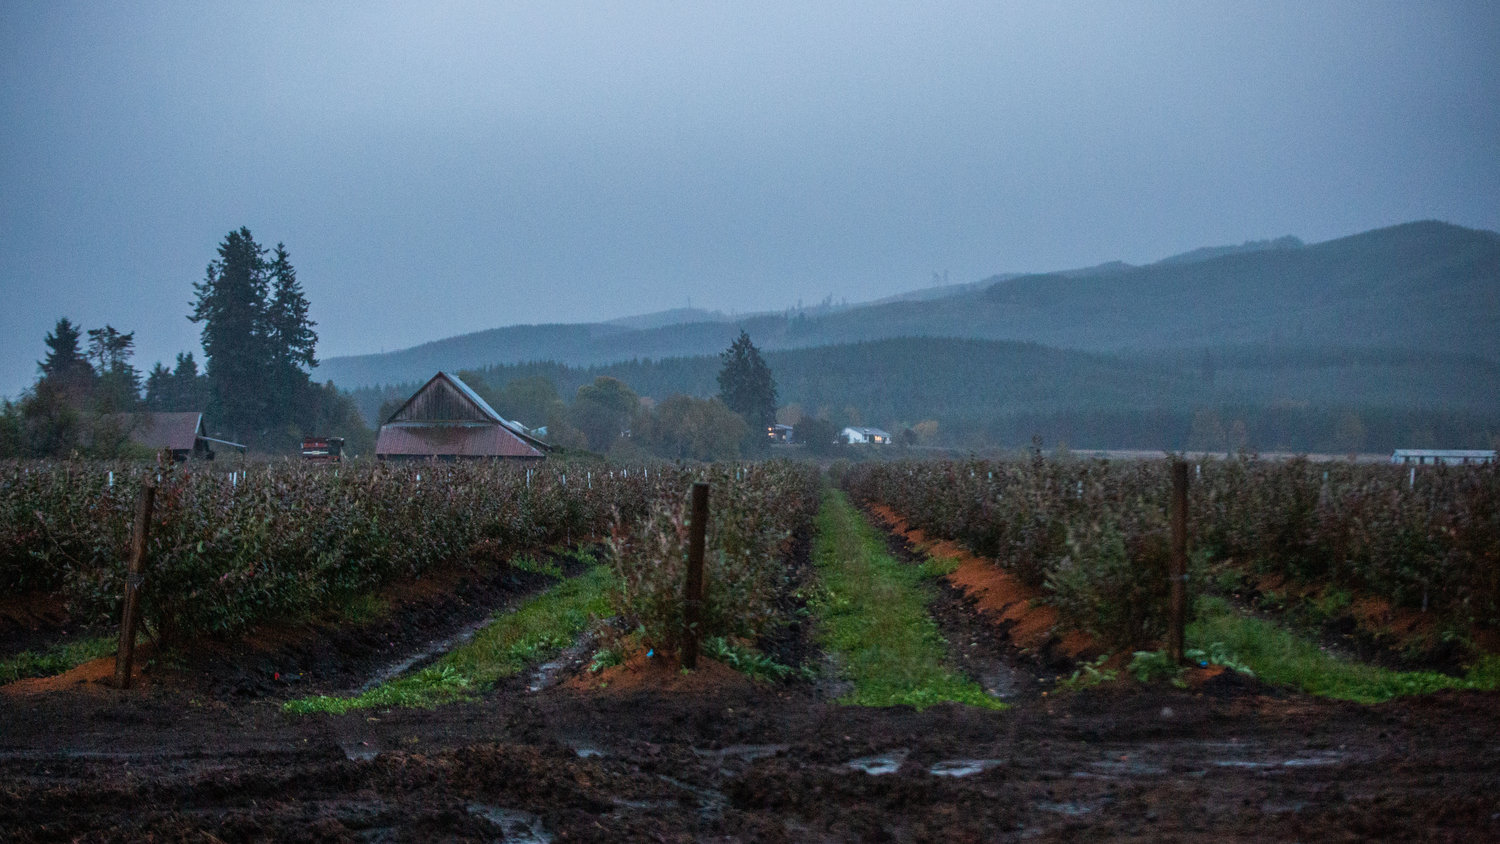 As the day breaks, blueberry bushes drip with the night’s heavy rain in the Boistfort Valley on Saturday morning.